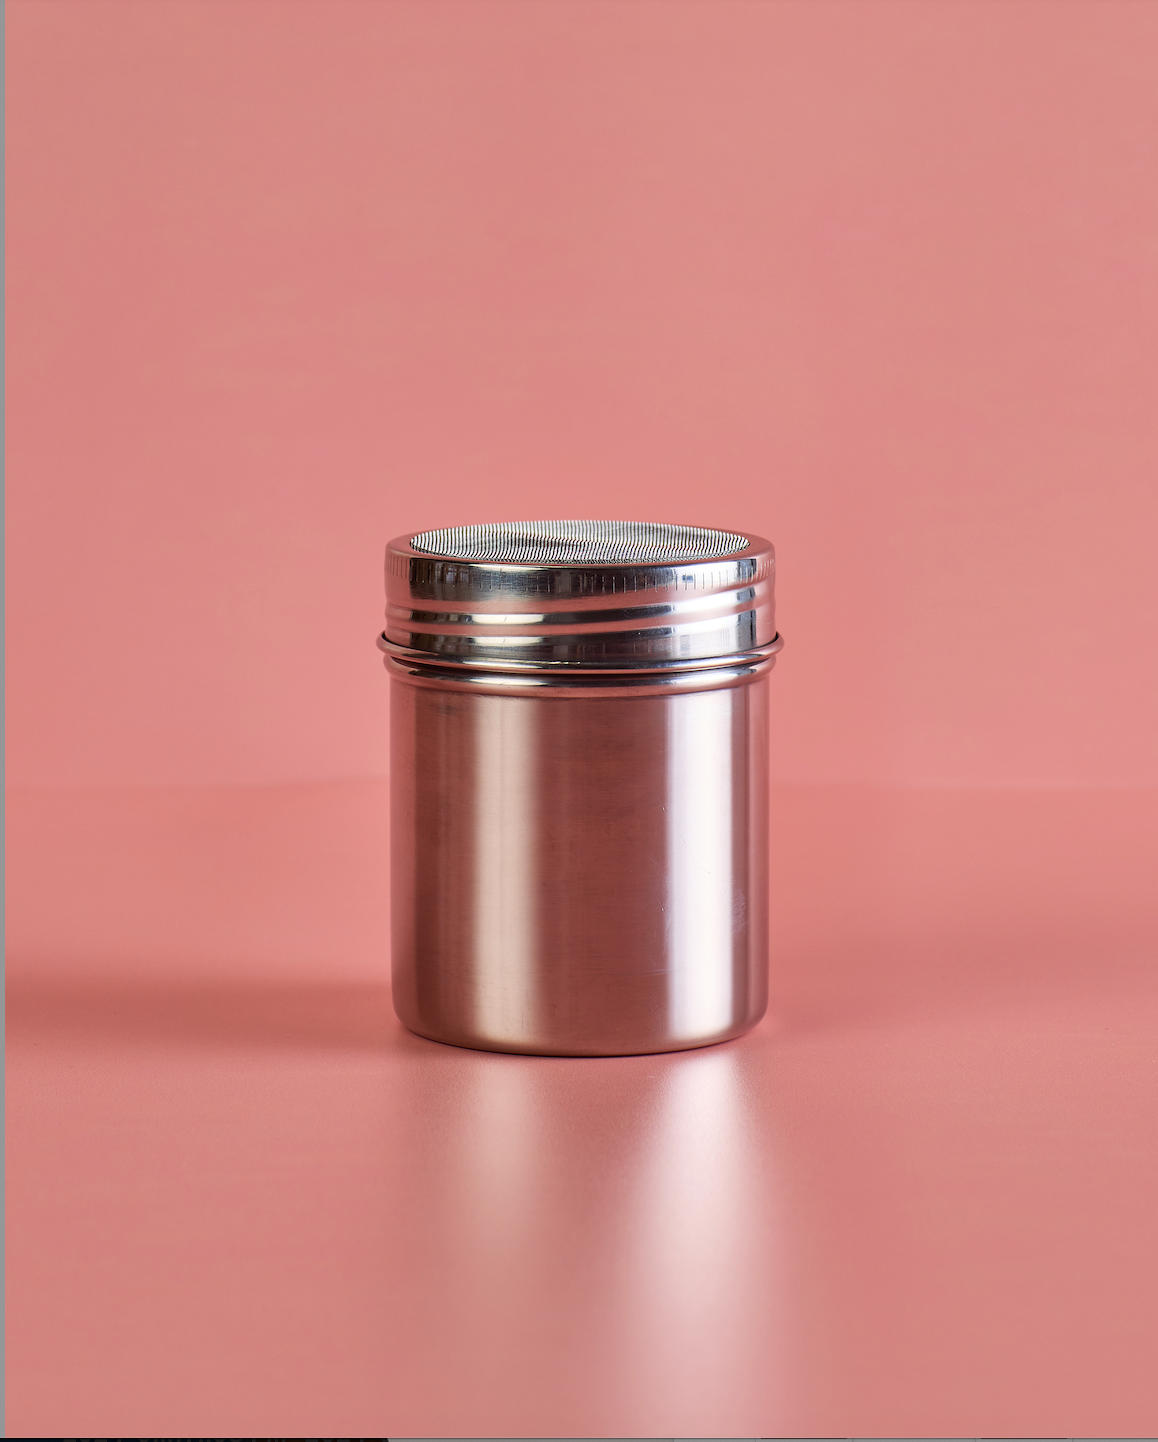 Stainless Steel Powder Shaker (powder not included)